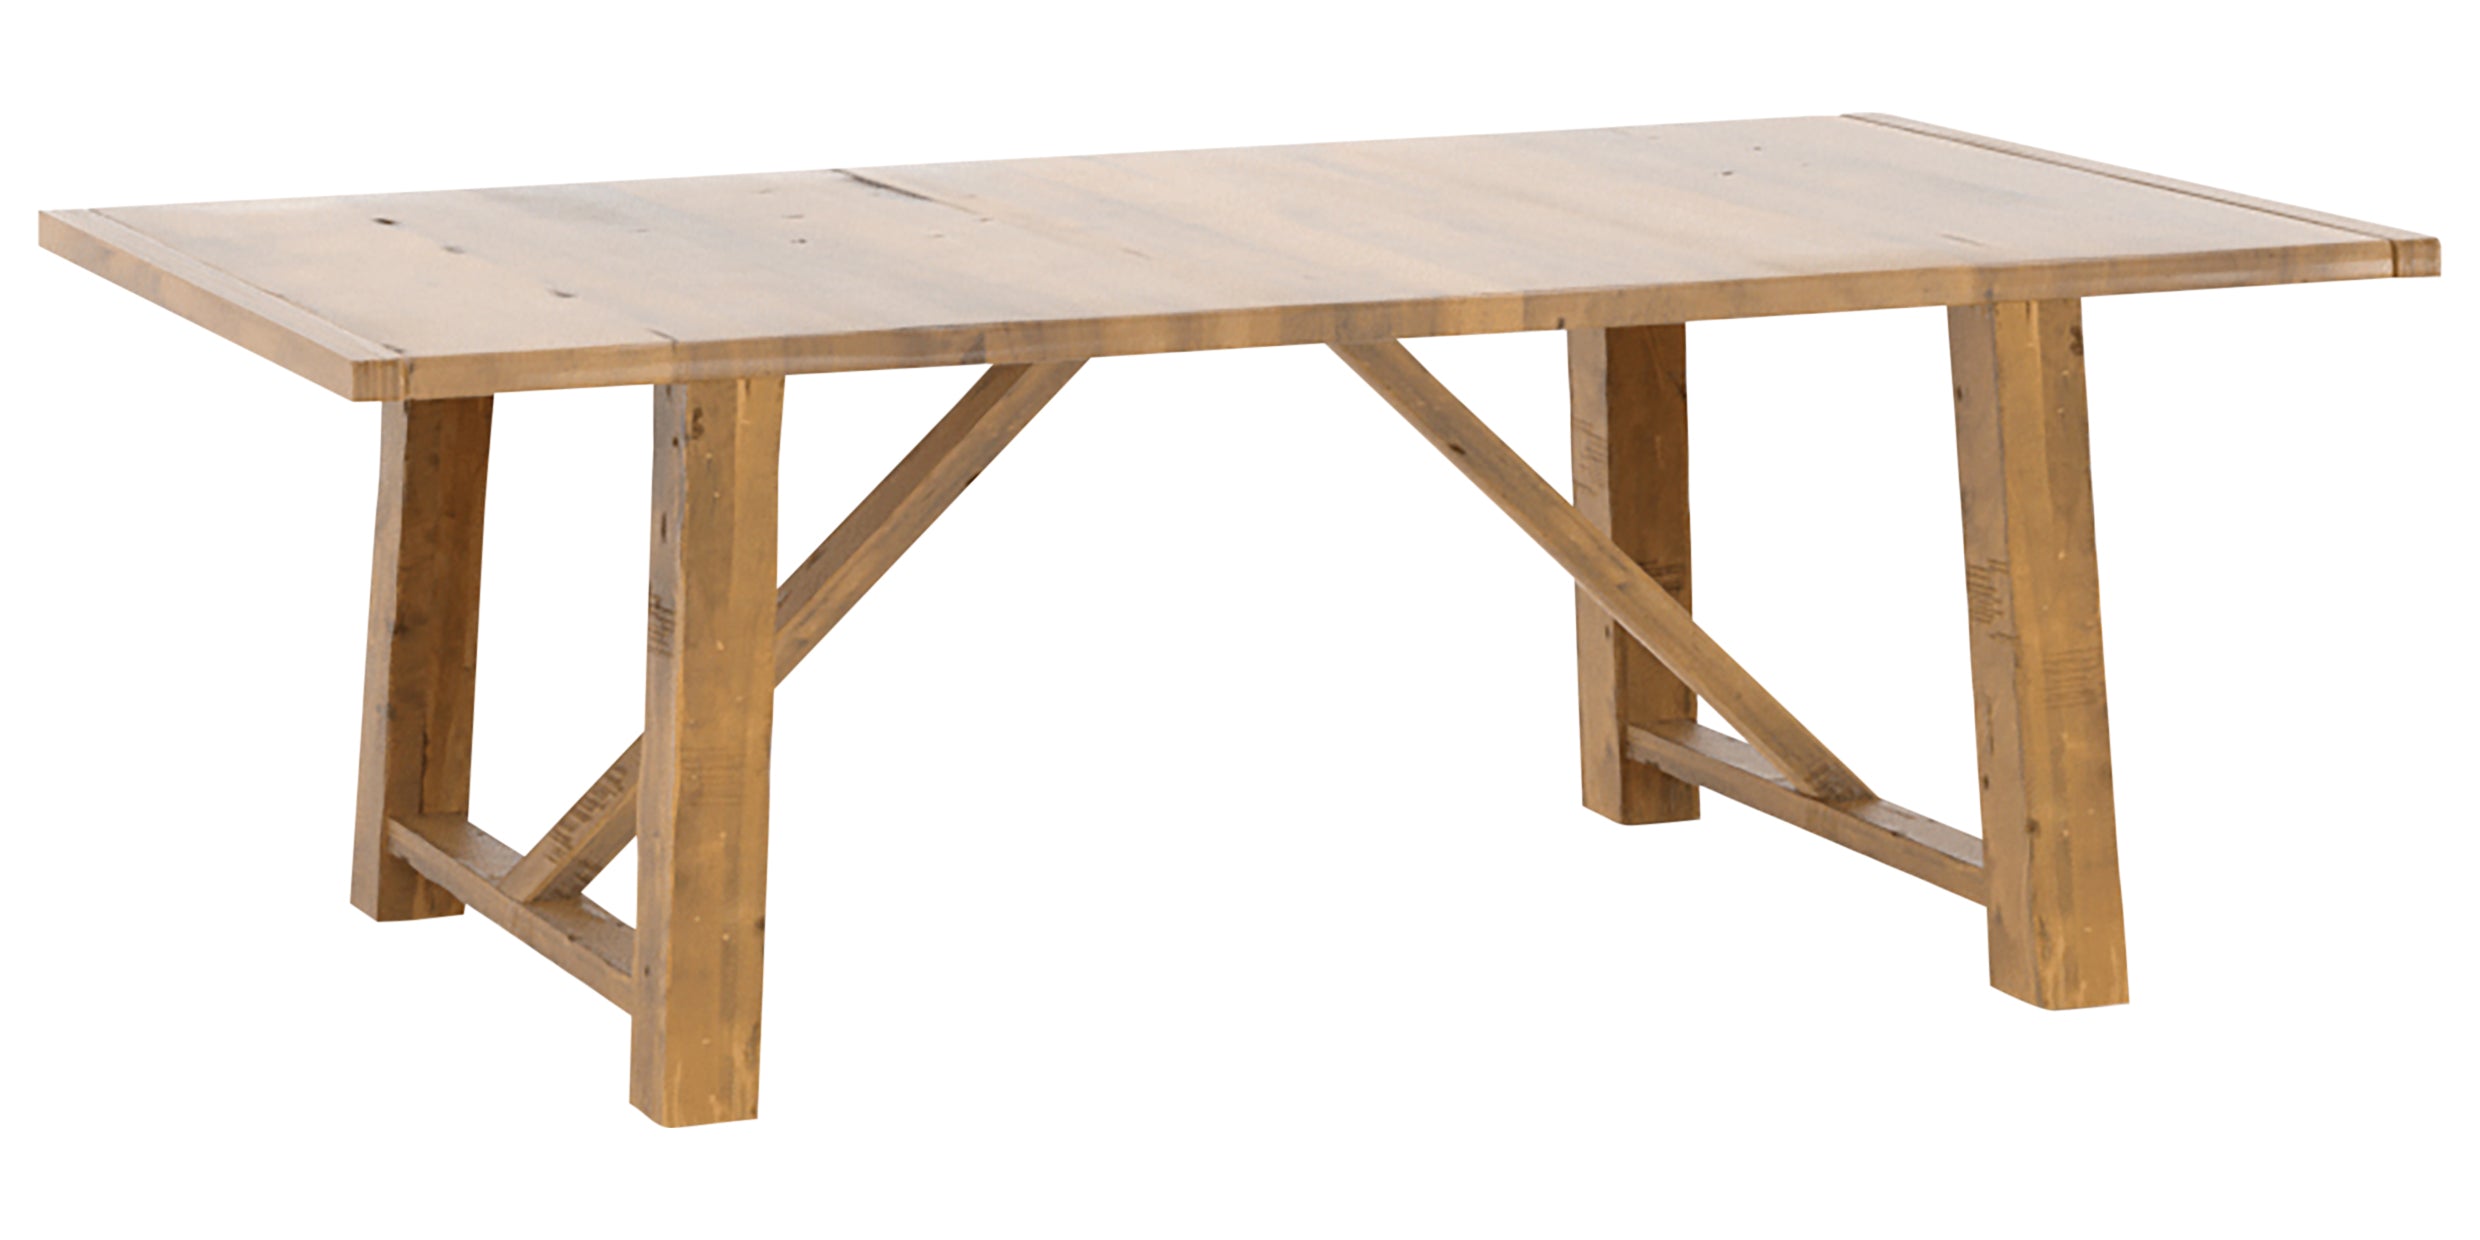 No Leaf | Canadel Champlain 4284 Dining Table with HM Base | Valley Ridge Furniture